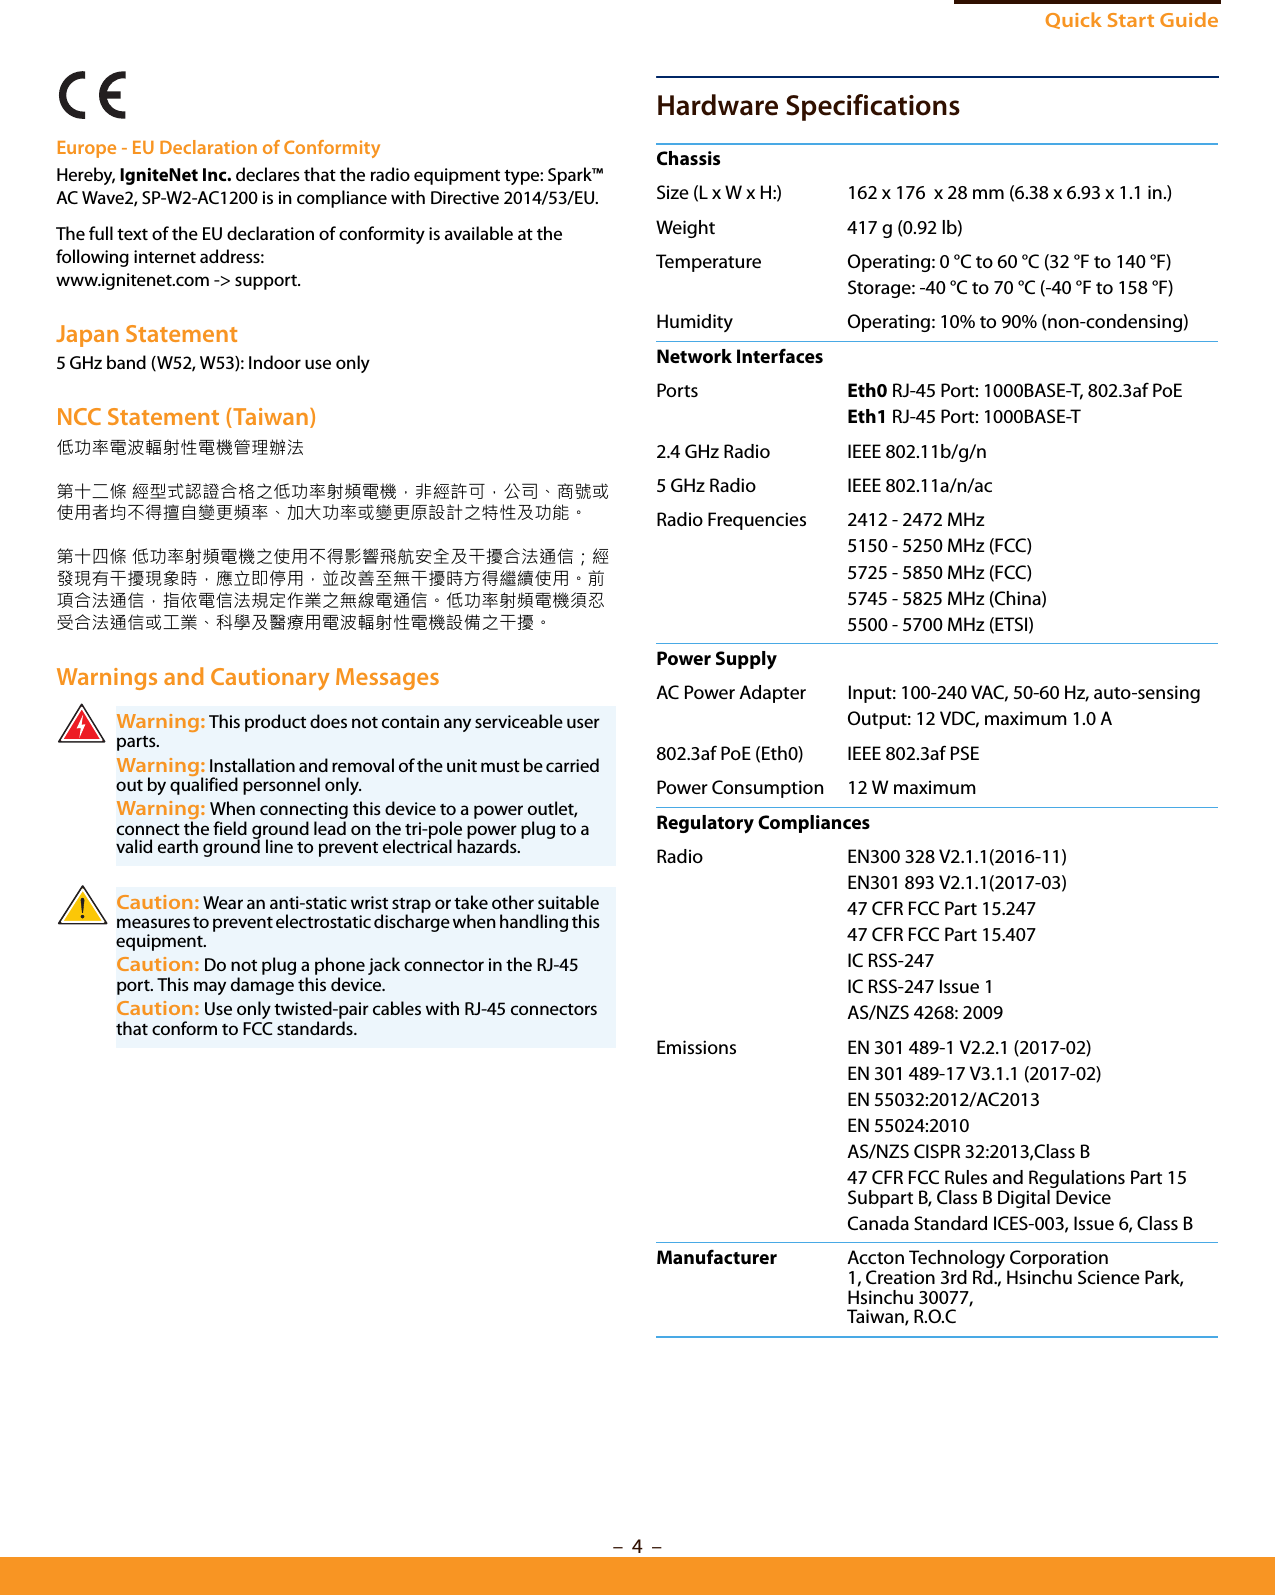 Quick Start Guide–  4  –Europe - EU Declaration of ConformityHereby, IgniteNet Inc. declares that the radio equipment type: Spark™ AC Wave2, SP-W2-AC1200 is in compliance with Directive 2014/53/EU.The full text of the EU declaration of conformity is available at the following internet address:www.ignitenet.com -&gt; support.Japan Statement5 GHz band (W52, W53): Indoor use onlyNCC Statement (Taiwan)低功率電波輻射性電機管理辦法第十二條 經型式認證合格之低功率射頻電機，非經許可，公司、商號或使用者均不得擅自變更頻率、加大功率或變更原設計之特性及功能。第十四條 低功率射頻電機之使用不得影響飛航安全及干擾合法通信；經發現有干擾現象時，應立即停用，並改善至無干擾時方得繼續使用。前項合法通信，指依電信法規定作業之無線電通信。低功率射頻電機須忍受合法通信或工業、科學及醫療用電波輻射性電機設備之干擾。Warnings and Cautionary MessagesHardware SpecificationsWarning: This product does not contain any serviceable user parts.Warning: Installation and removal of the unit must be carried out by qualified personnel only.Warning: When connecting this device to a power outlet, connect the field ground lead on the tri-pole power plug to a valid earth ground line to prevent electrical hazards.Caution: Wear an anti-static wrist strap or take other suitable measures to prevent electrostatic discharge when handling this equipment.Caution: Do not plug a phone jack connector in the RJ-45 port. This may damage this device. Caution: Use only twisted-pair cables with RJ-45 connectors that conform to FCC standards. ChassisSize (L x W x H:) 162 x 176  x 28 mm (6.38 x 6.93 x 1.1 in.)Weight 417 g (0.92 lb)Temperature Operating: 0 °C to 60 °C (32 °F to 140 °F)Storage: -40 °C to 70 °C (-40 °F to 158 °F)Humidity Operating: 10% to 90% (non-condensing)Network InterfacesPorts Eth0 RJ-45 Port: 1000BASE-T, 802.3af PoEEth1 RJ-45 Port: 1000BASE-T2.4 GHz Radio IEEE 802.11b/g/n5 GHz Radio IEEE 802.11a/n/acRadio Frequencies 2412 - 2472 MHz5150 - 5250 MHz (FCC)5725 - 5850 MHz (FCC)5745 - 5825 MHz (China)5500 - 5700 MHz (ETSI)Power SupplyAC Power Adapter Input: 100-240 VAC, 50-60 Hz, auto-sensingOutput: 12 VDC, maximum 1.0 A 802.3af PoE (Eth0) IEEE 802.3af PSEPower Consumption 12 W maximumRegulatory CompliancesRadio EN300 328 V2.1.1(2016-11)EN301 893 V2.1.1(2017-03)47 CFR FCC Part 15.24747 CFR FCC Part 15.407IC RSS-247IC RSS-247 Issue 1AS/NZS 4268: 2009Emissions EN 301 489-1 V2.2.1 (2017-02)EN 301 489-17 V3.1.1 (2017-02)EN 55032:2012/AC2013EN 55024:2010AS/NZS CISPR 32:2013,Class B47 CFR FCC Rules and Regulations Part 15 Subpart B, Class B Digital Device Canada Standard ICES-003, Issue 6, Class B Manufacturer Accton Technology Corporation1, Creation 3rd Rd., Hsinchu Science Park, Hsinchu 30077, Taiwan, R.O.C